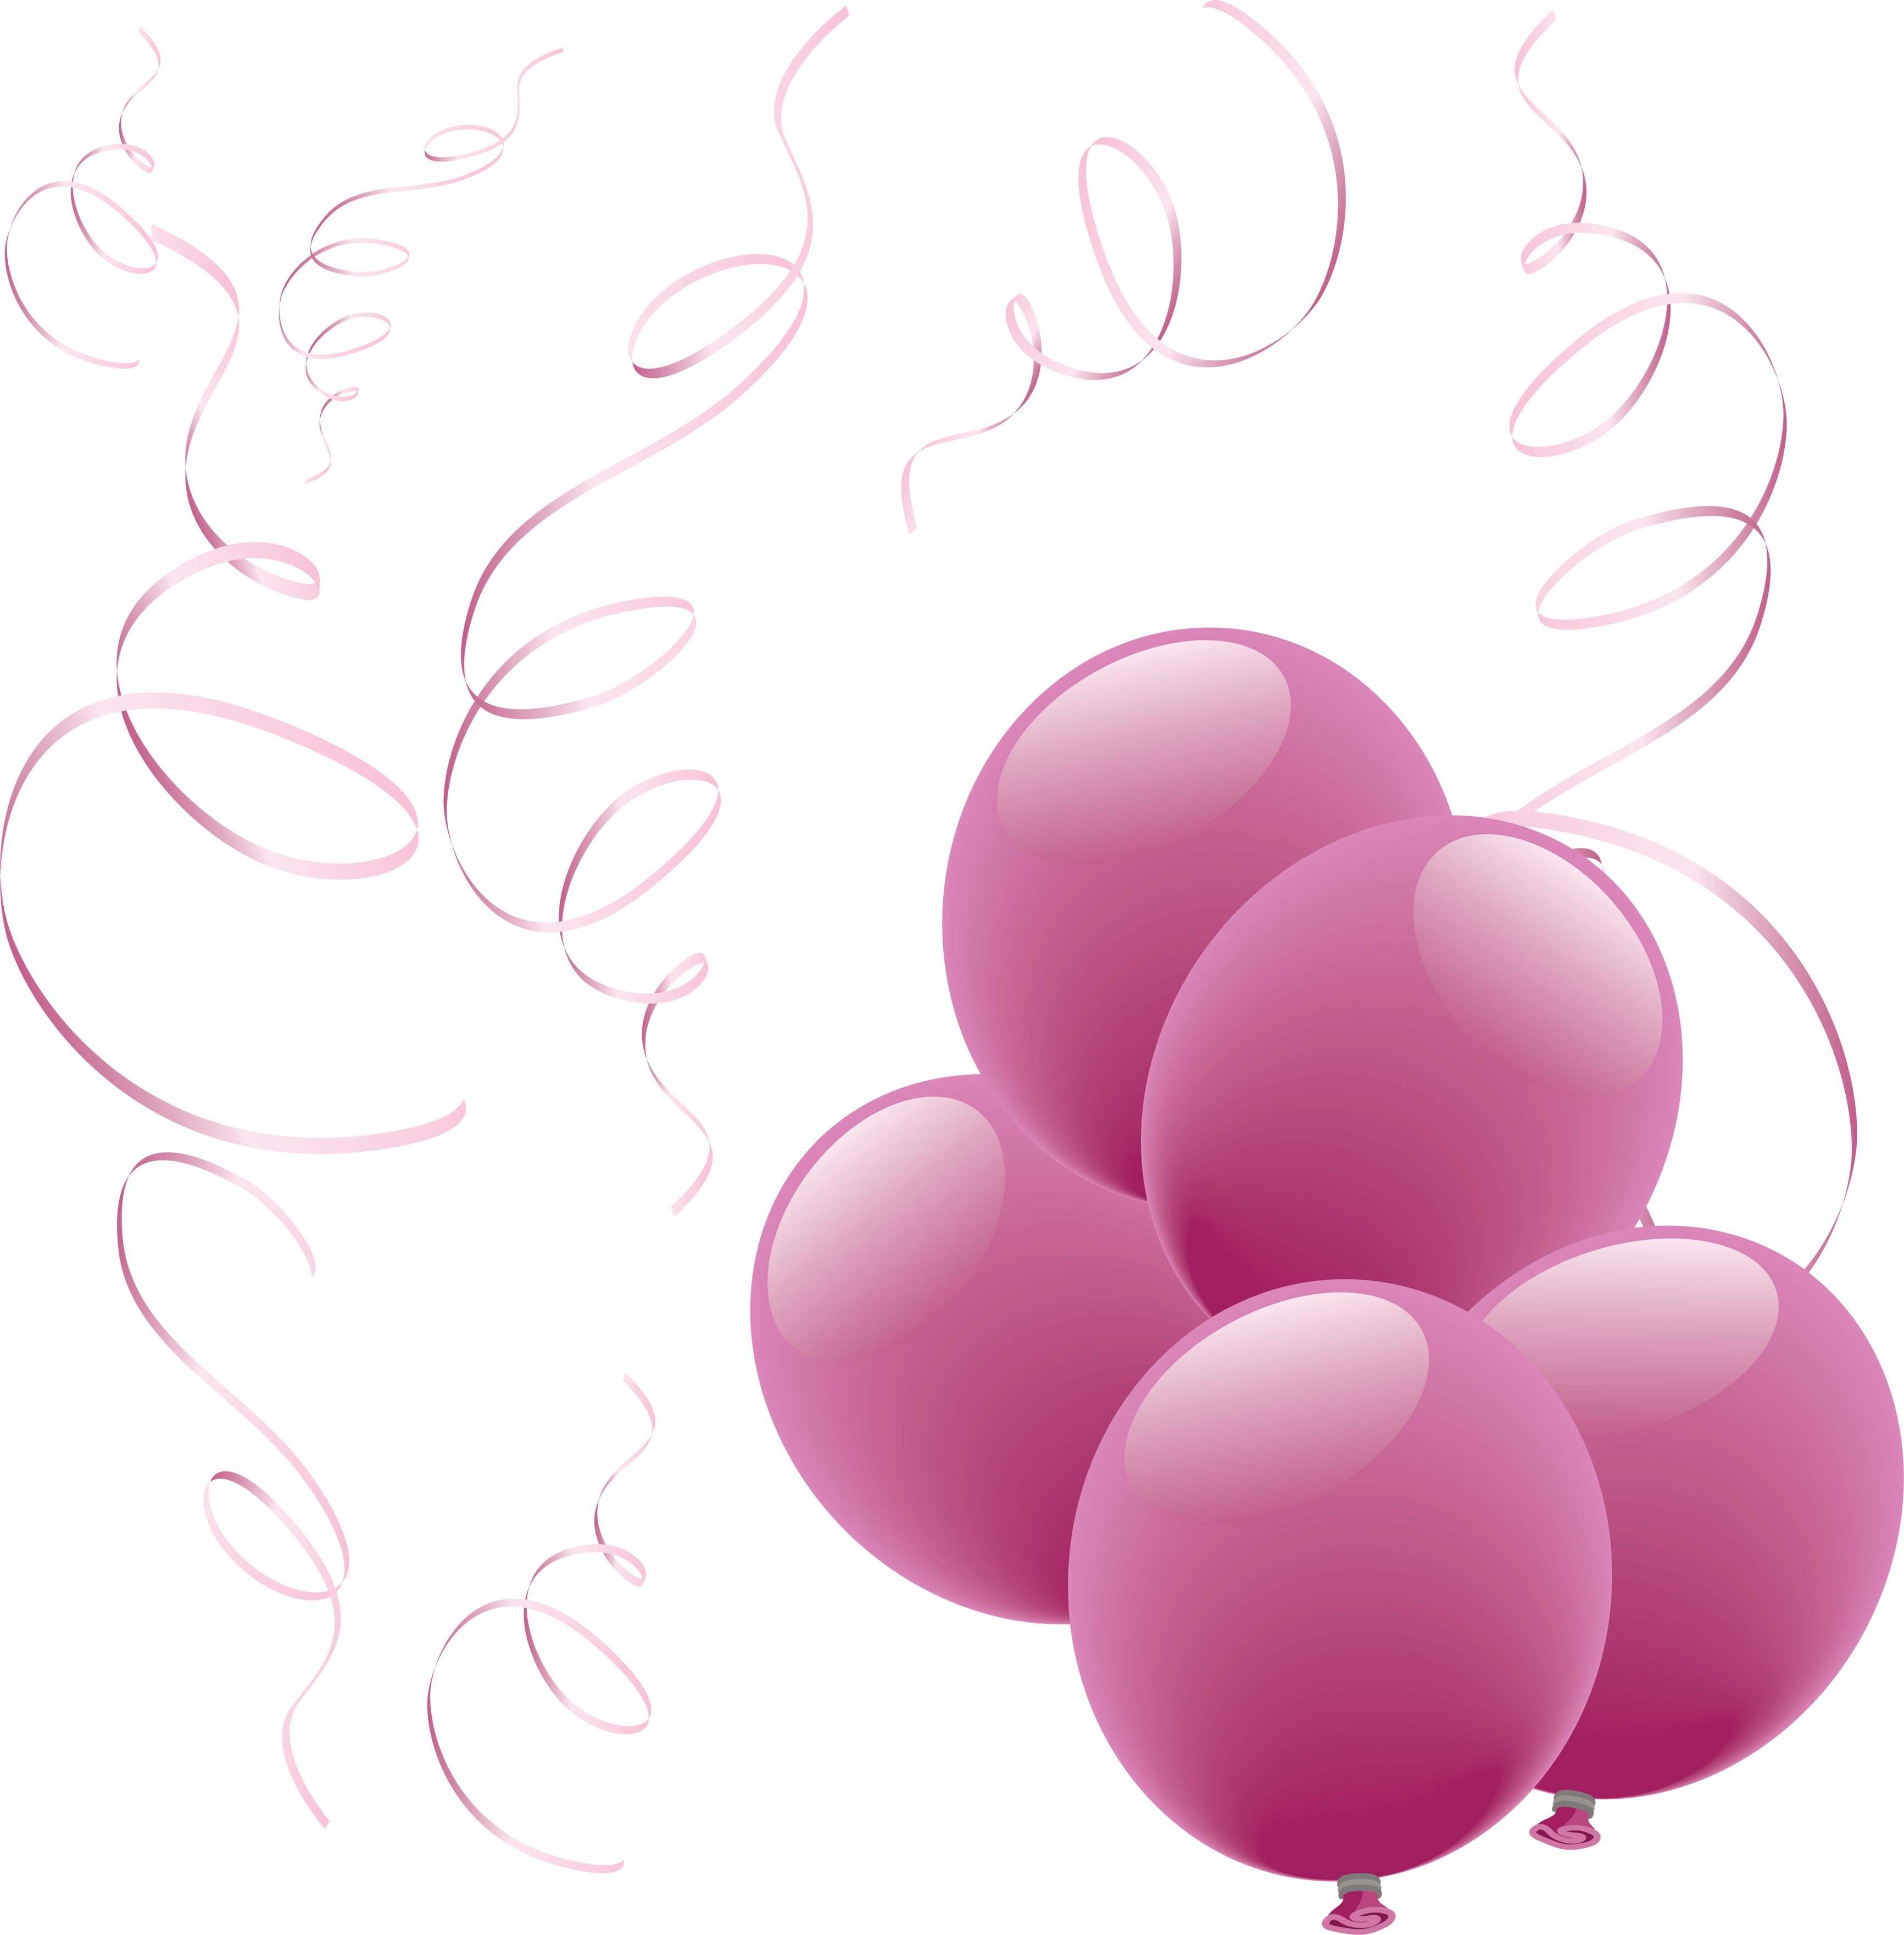 Purple Balloons Png Image - Purple Balloons With Transparent Backgrounds - HD Wallpaper 